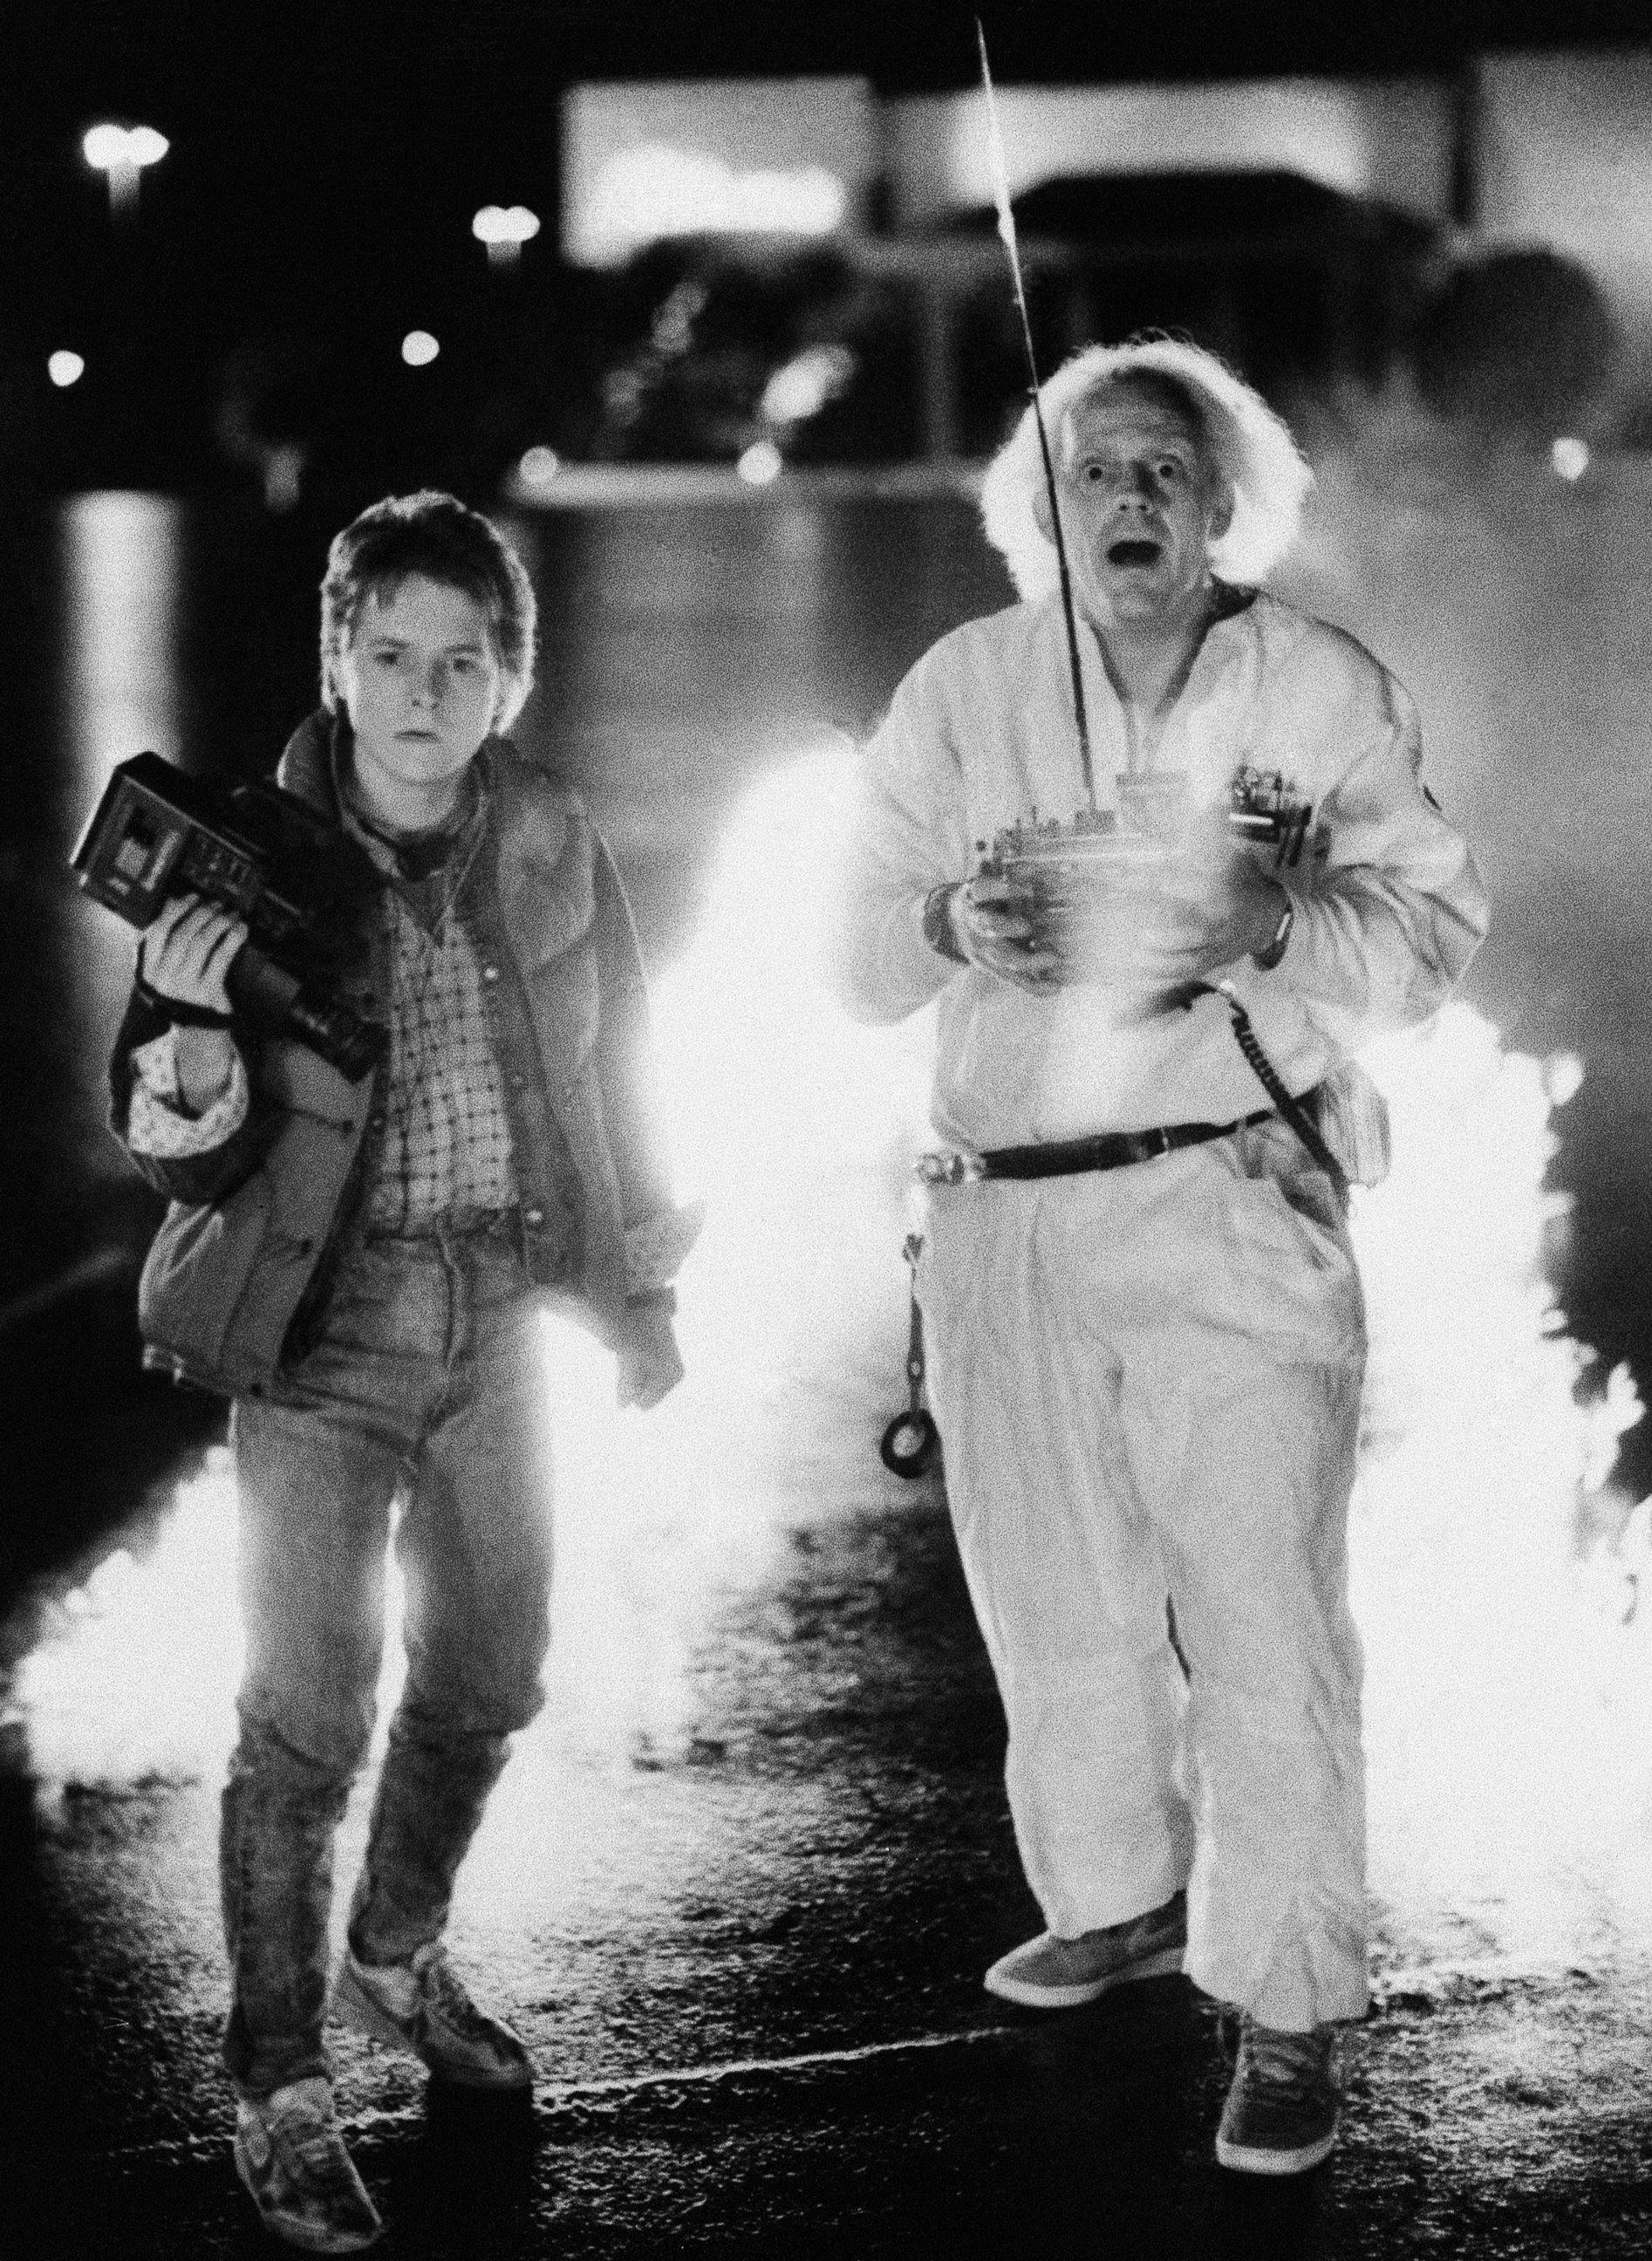 PHOTO: Michael J. Fox and Christopher Lloyd are pictured in a scene from "Back to the Future."